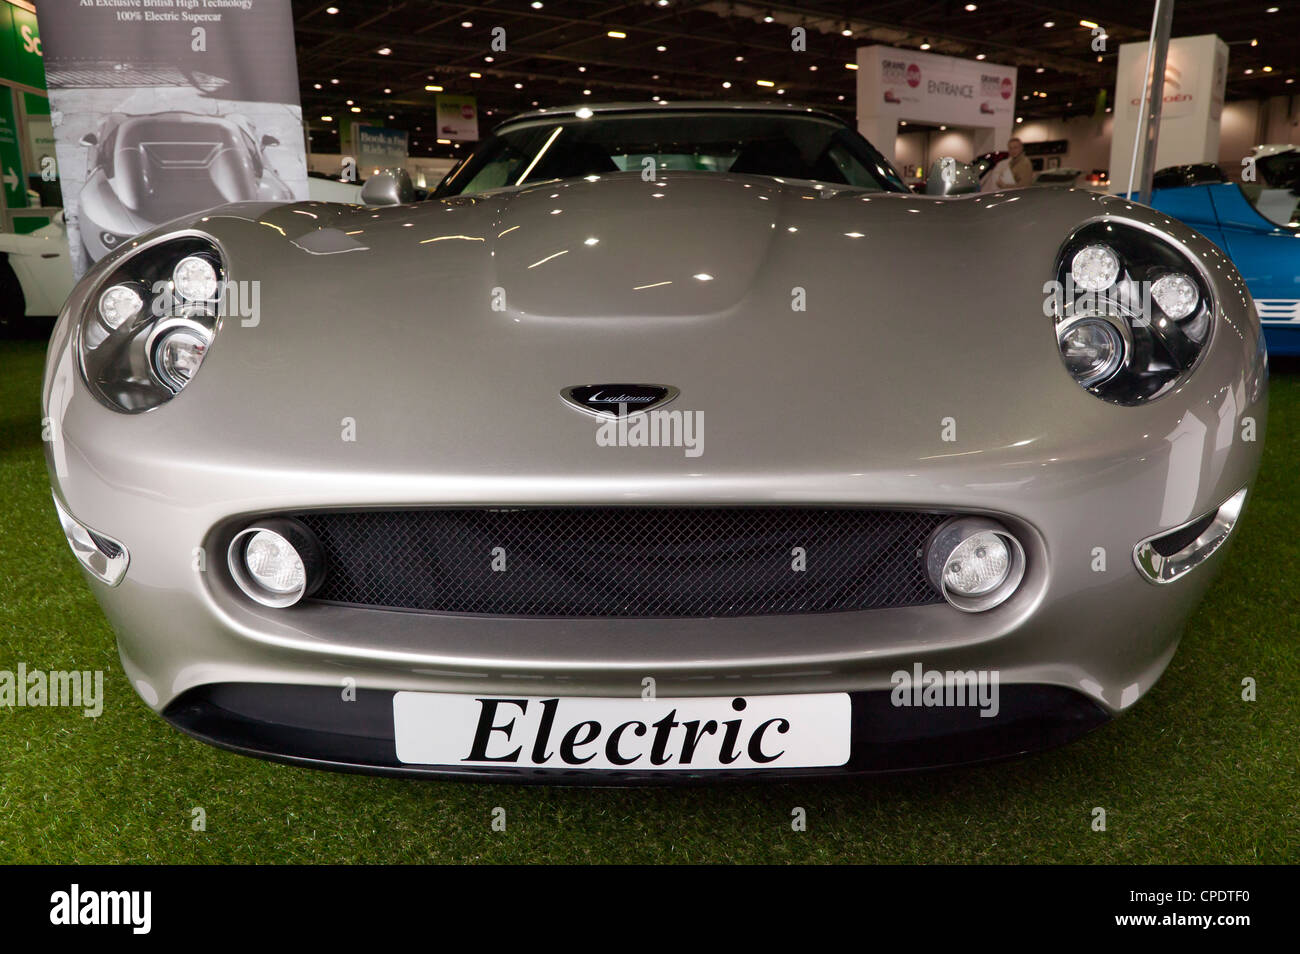 front view of the Lightning GT EV, on display at ecovelovcity, Excel, London. Stock Photo